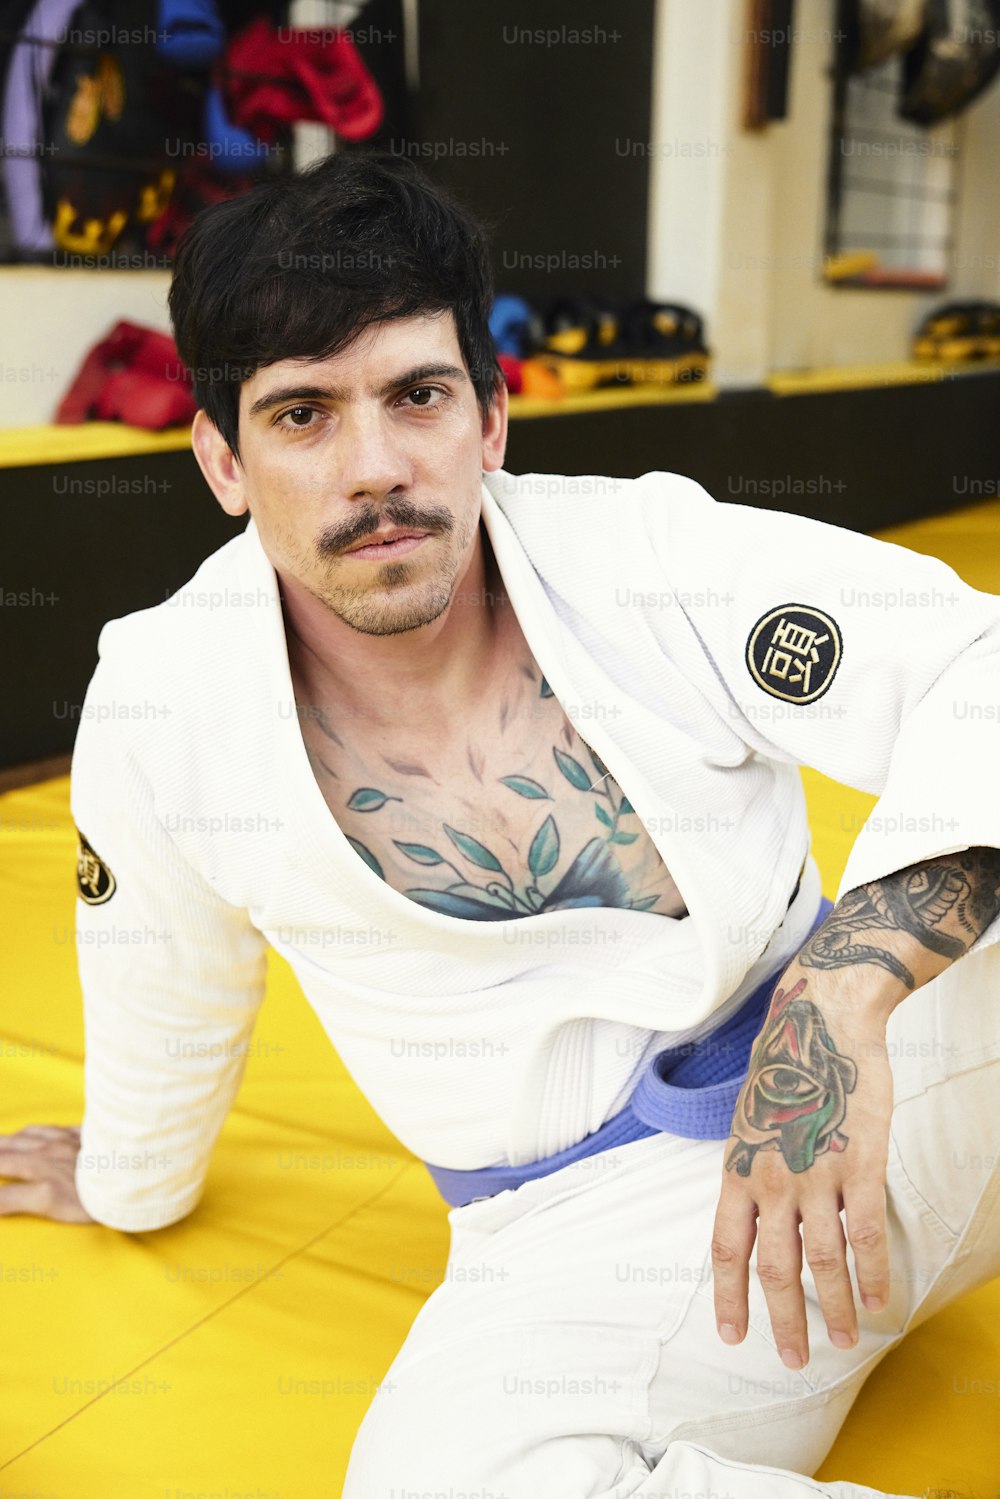 a man with tattoos sitting on a yellow mat